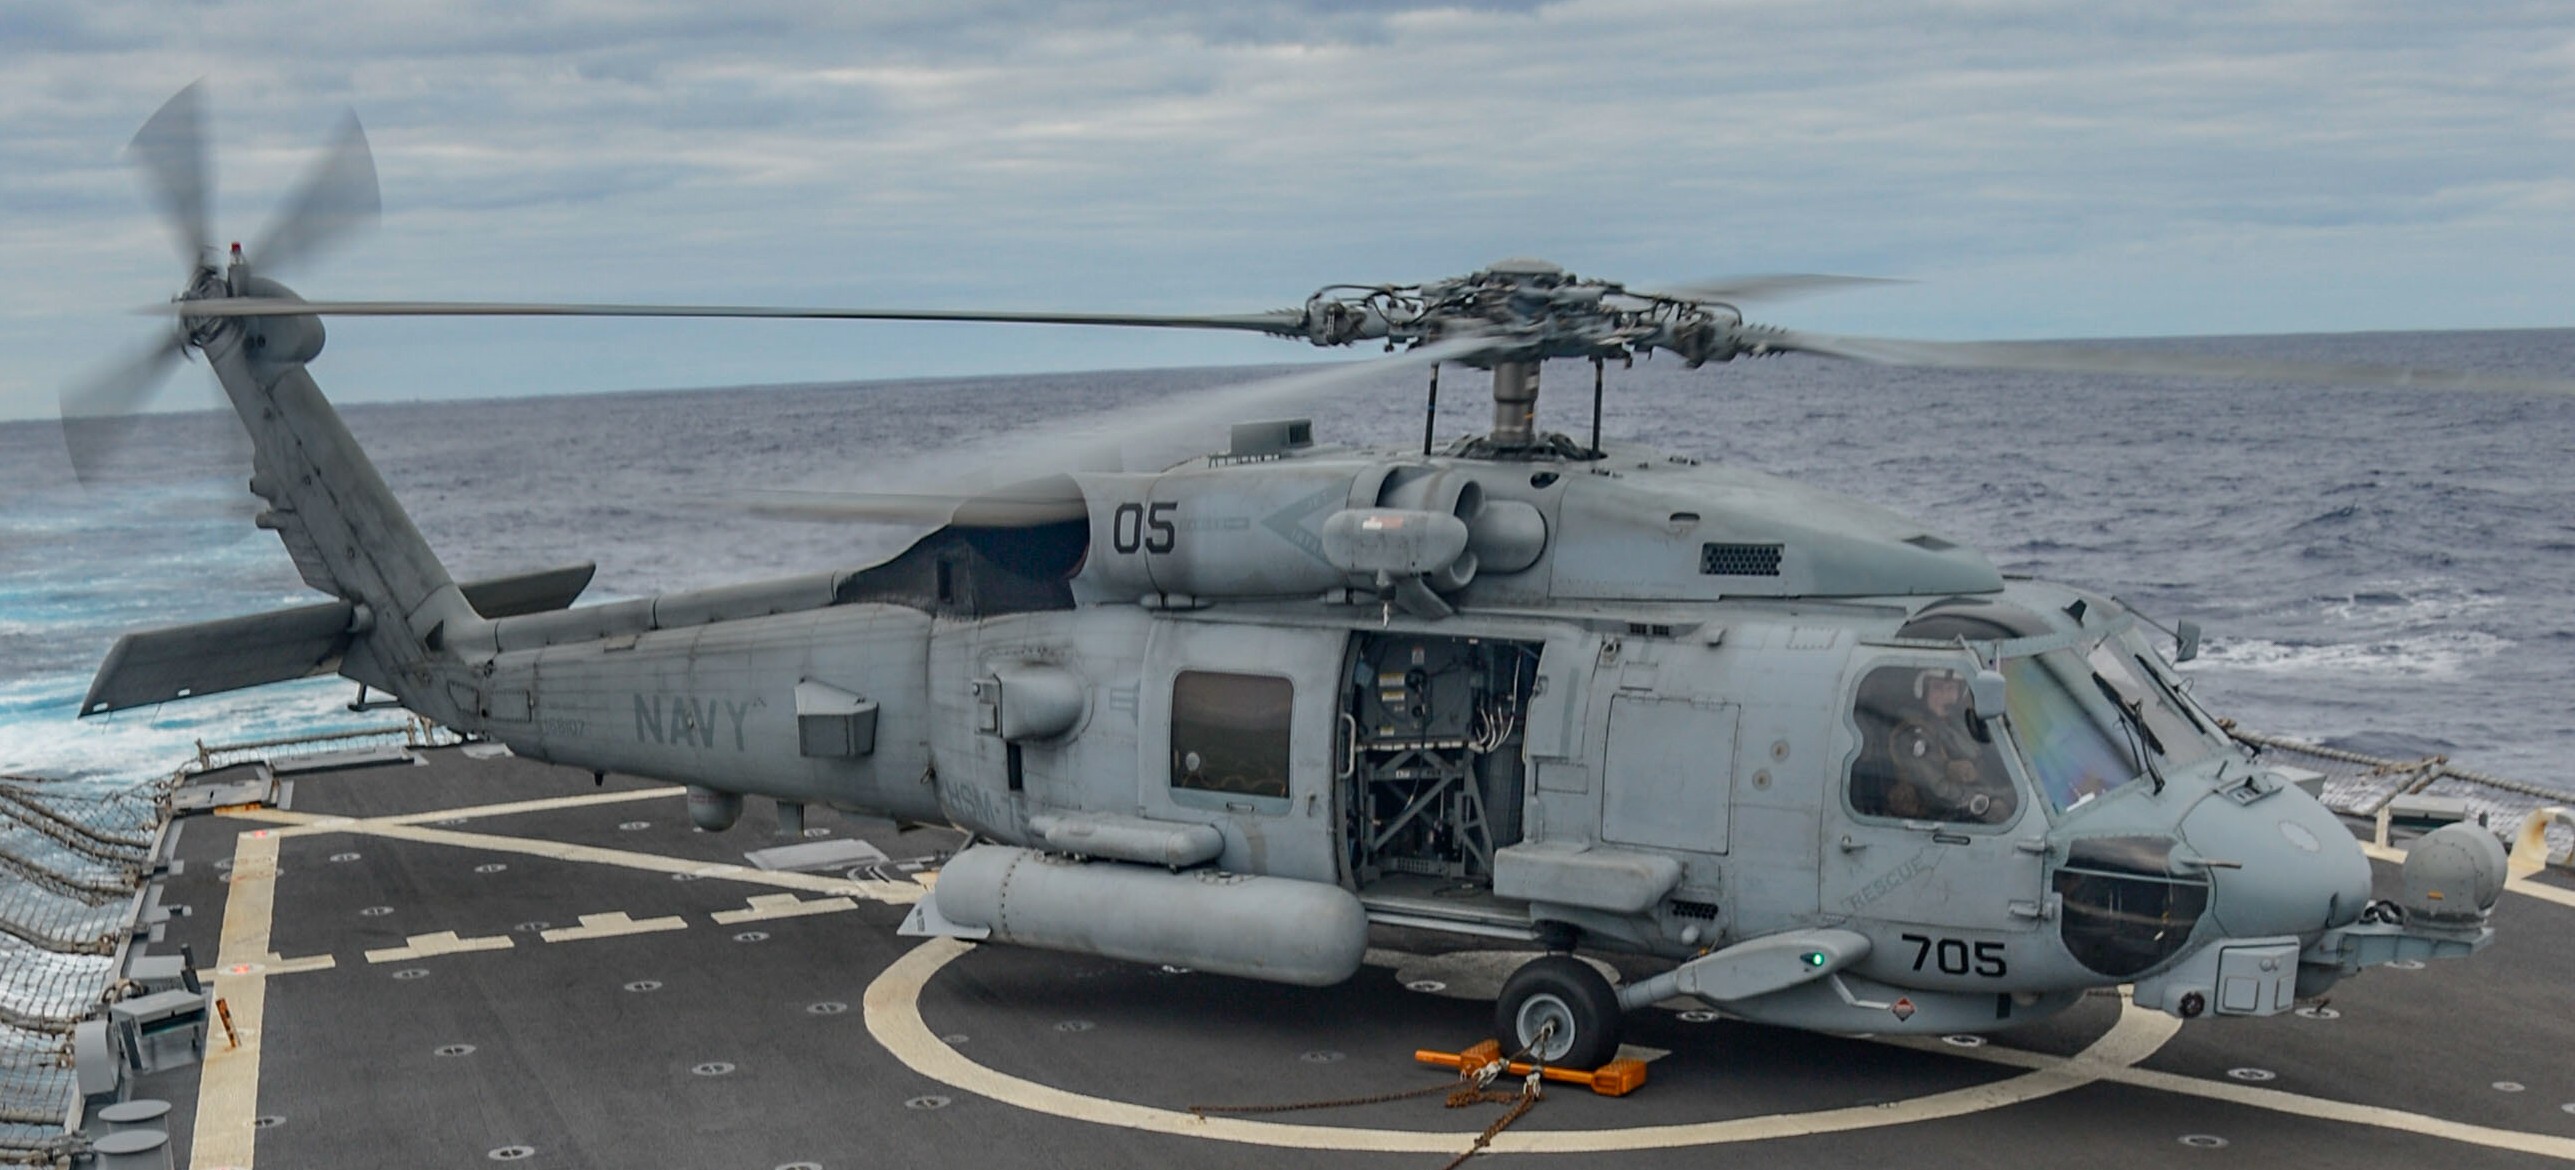 hsm-75 wolfpack helicopter maritime strike squadron us navy mh-60r seahawk 2013 58 its francesco mimbelli d 561 italian navy destroyer